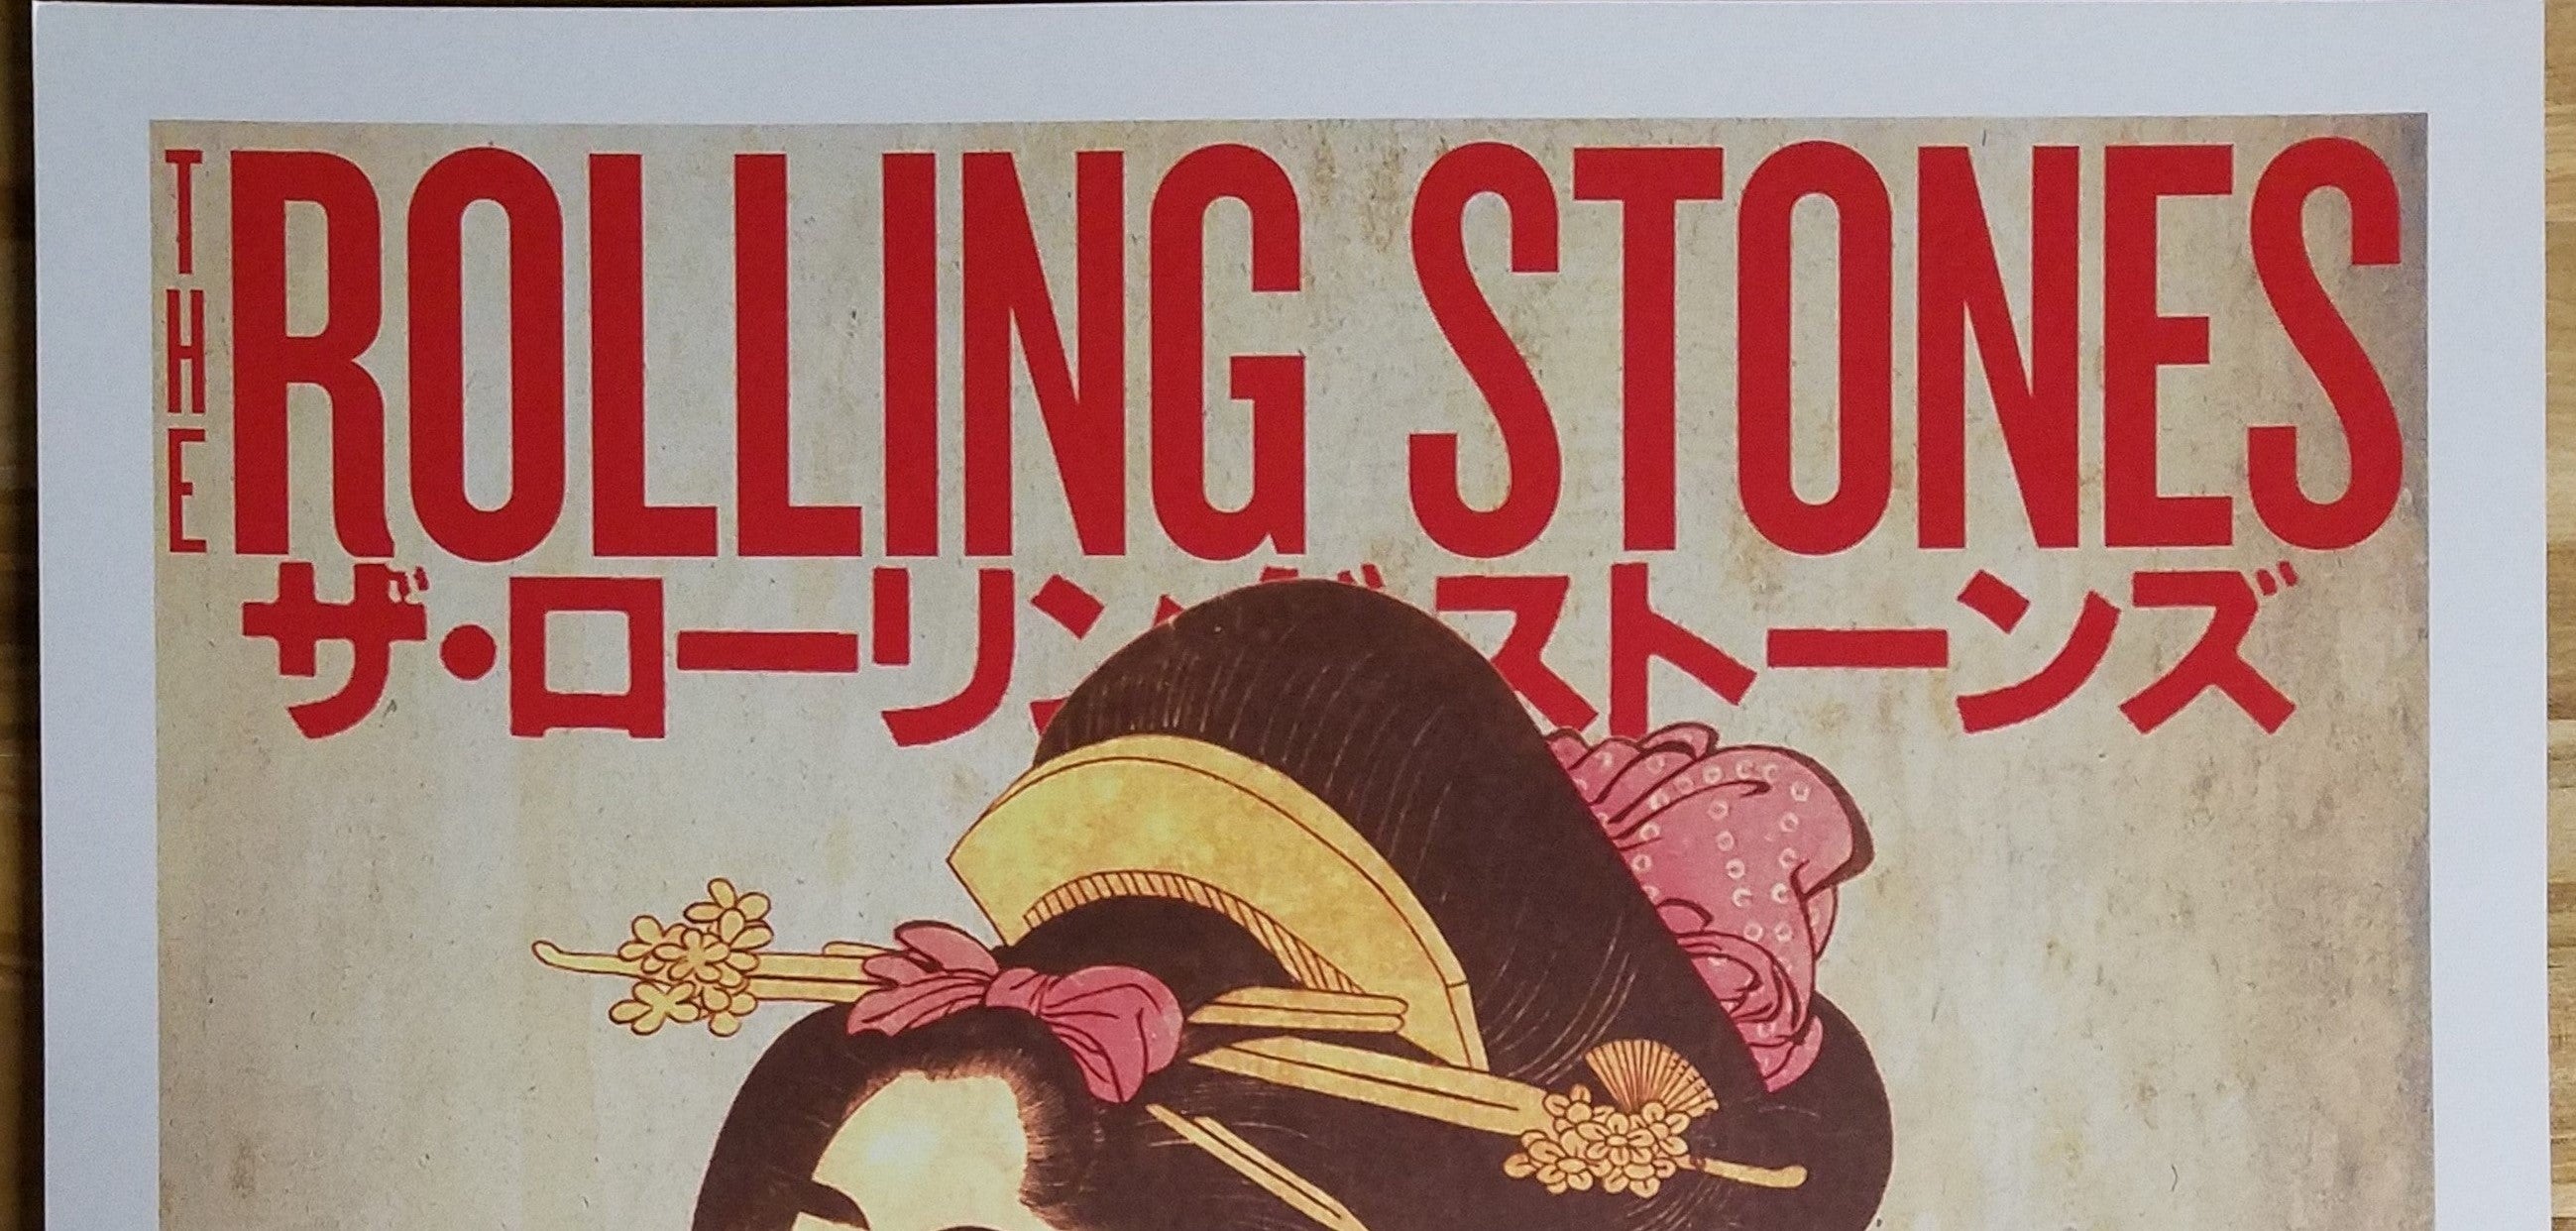 Title: Rolling Stones   Poster artist:   Edition:  xx/500  Type: Limited edition lithograph   Size: 17" x 23"  Location: Tokyo, Japan   Venue: Tokyo Dome   Notes:  1st edition, official poster hand numbered and embossed.  Official poster, Asia 14 On Fire Tour original from the show!